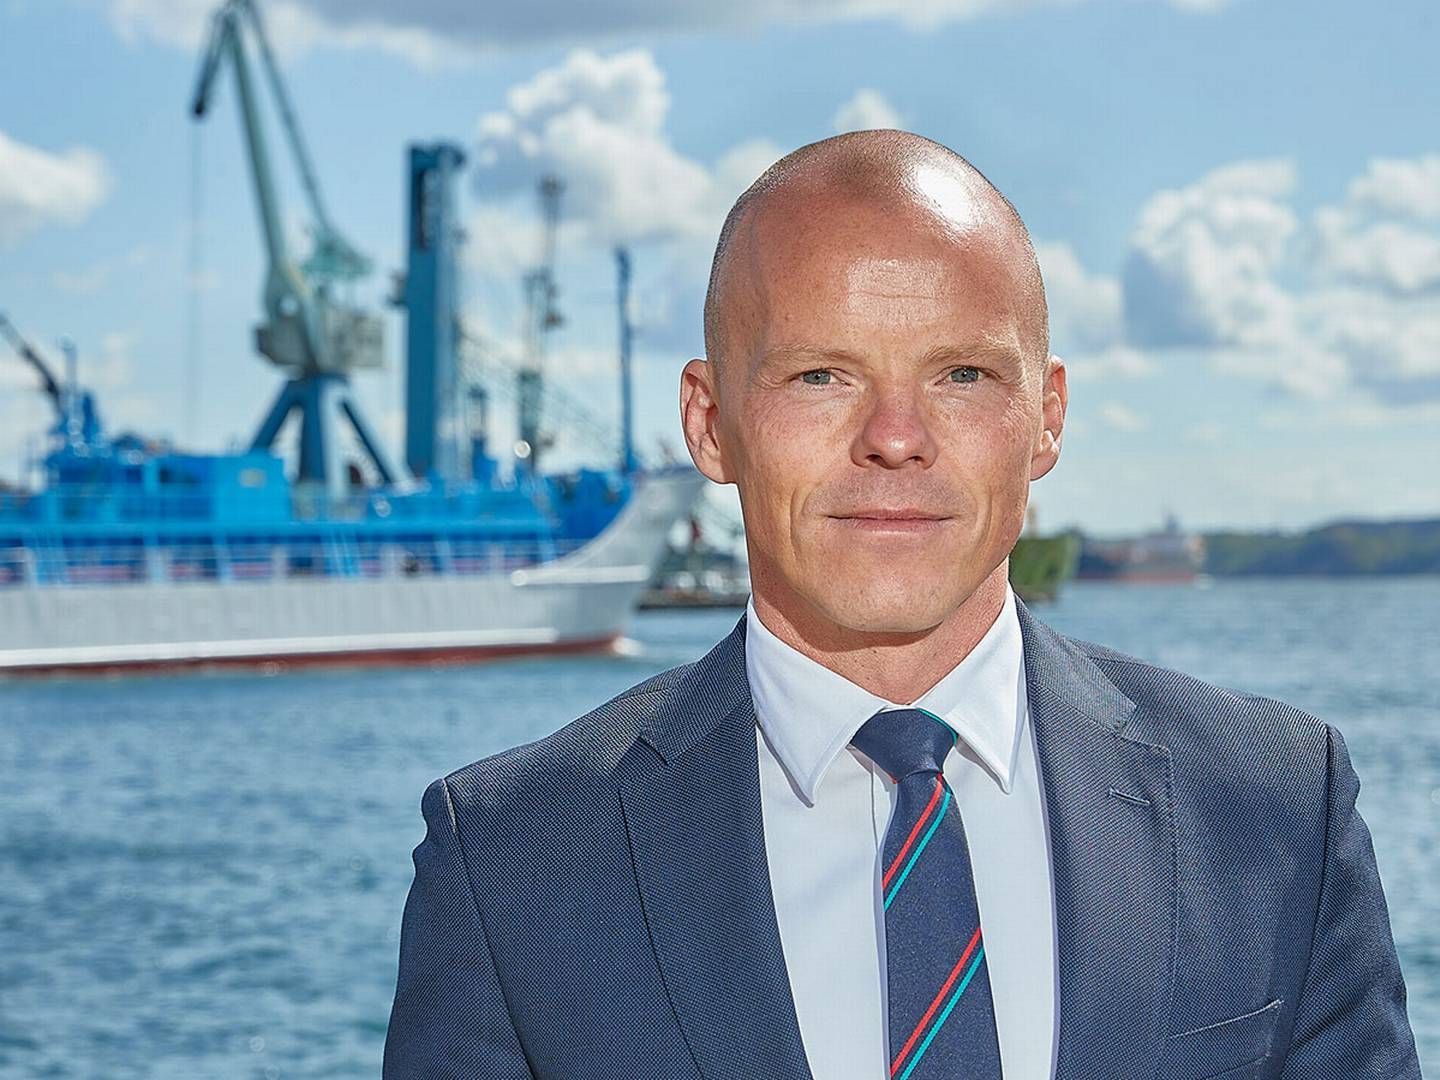 Svend Stenberg Mølholt has previously worked at Maersk's former logistics company Damco. He joined Monjasa in 2015 | Photo: Monjasa/PR